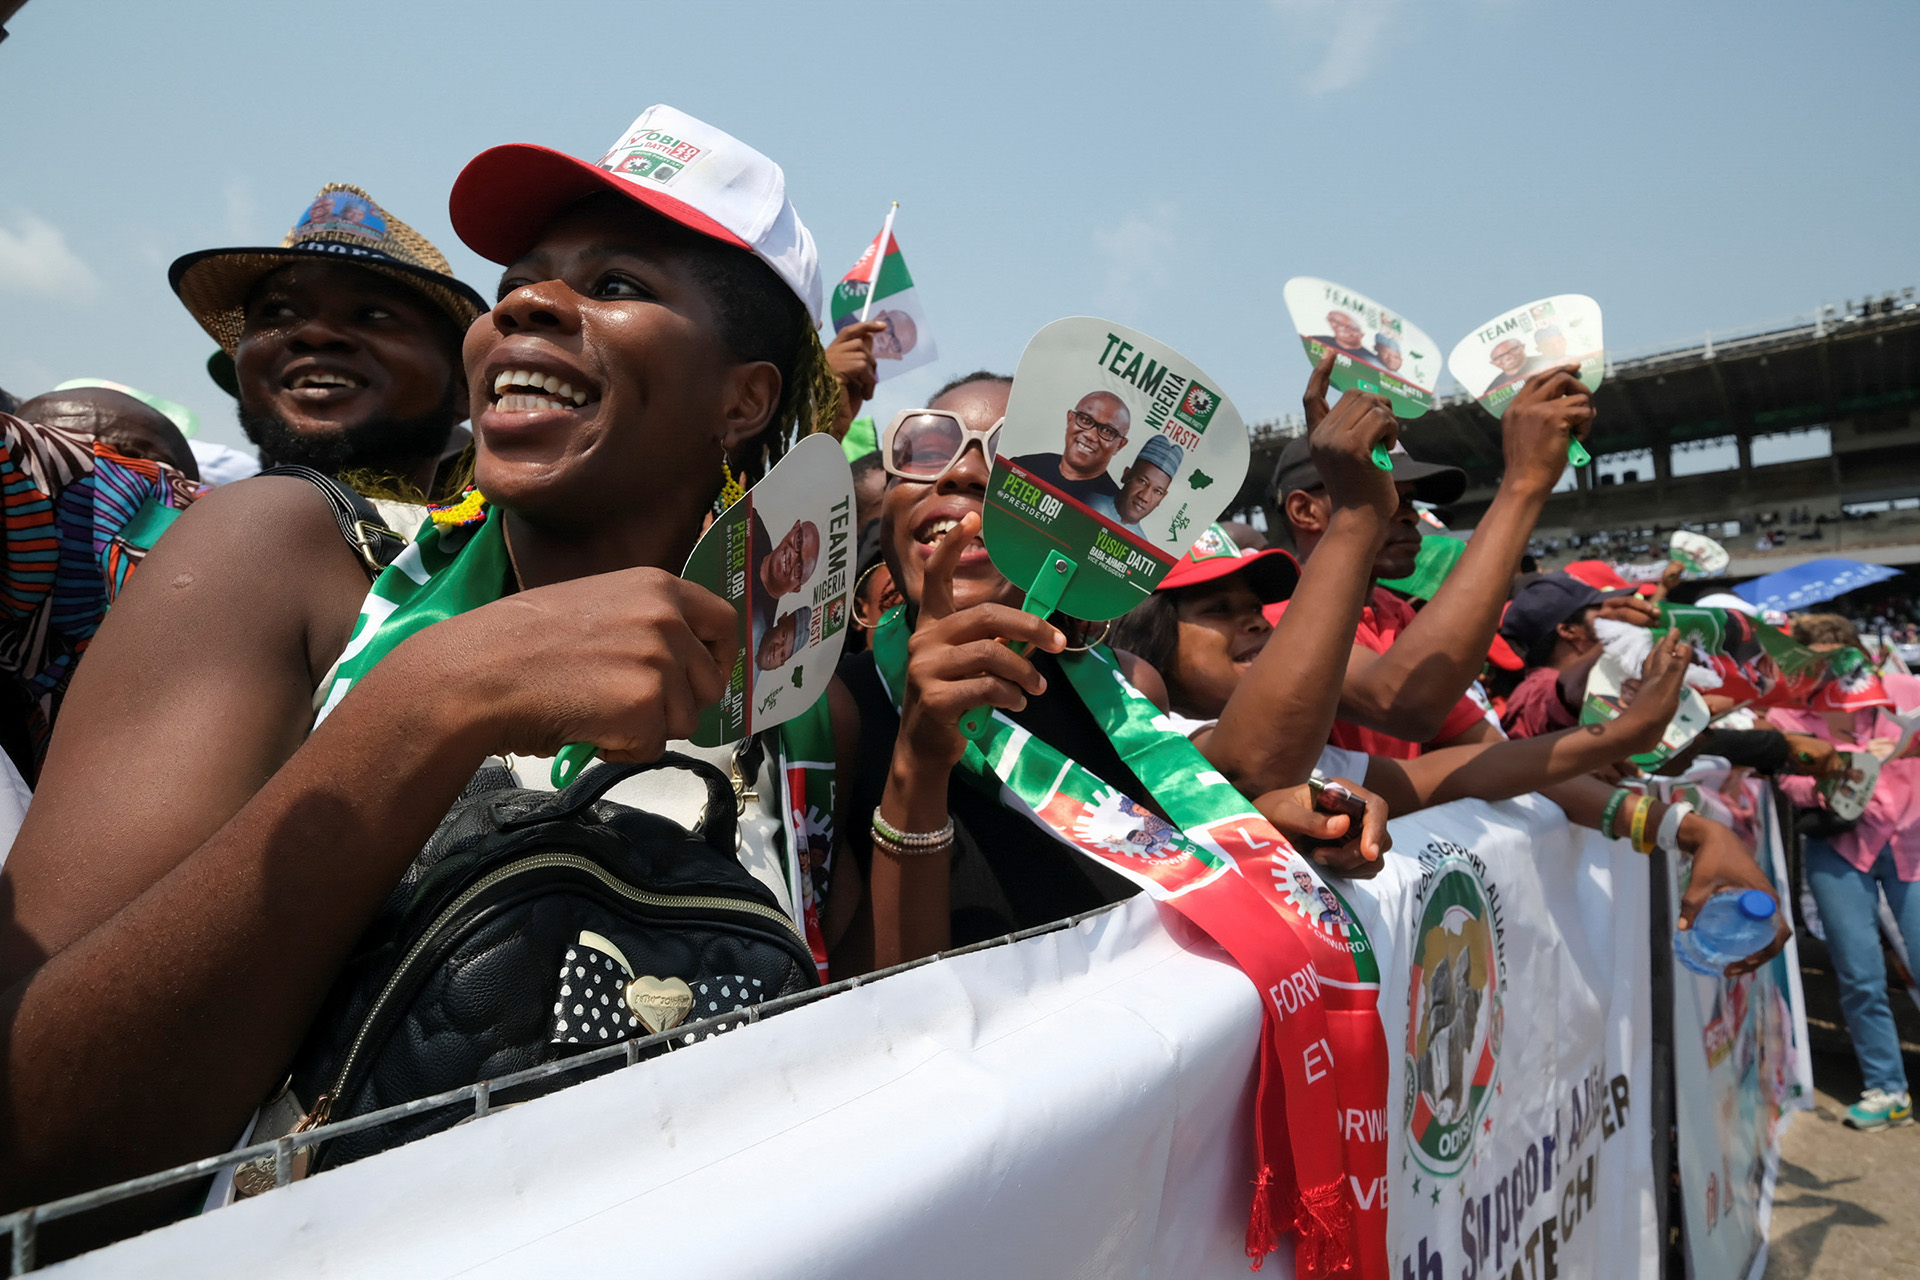 Supporters of presidential candidate Peter Obi, one of three main contenders in the 25 February election, at a campaign rally this month in Lagos, Nigeria.